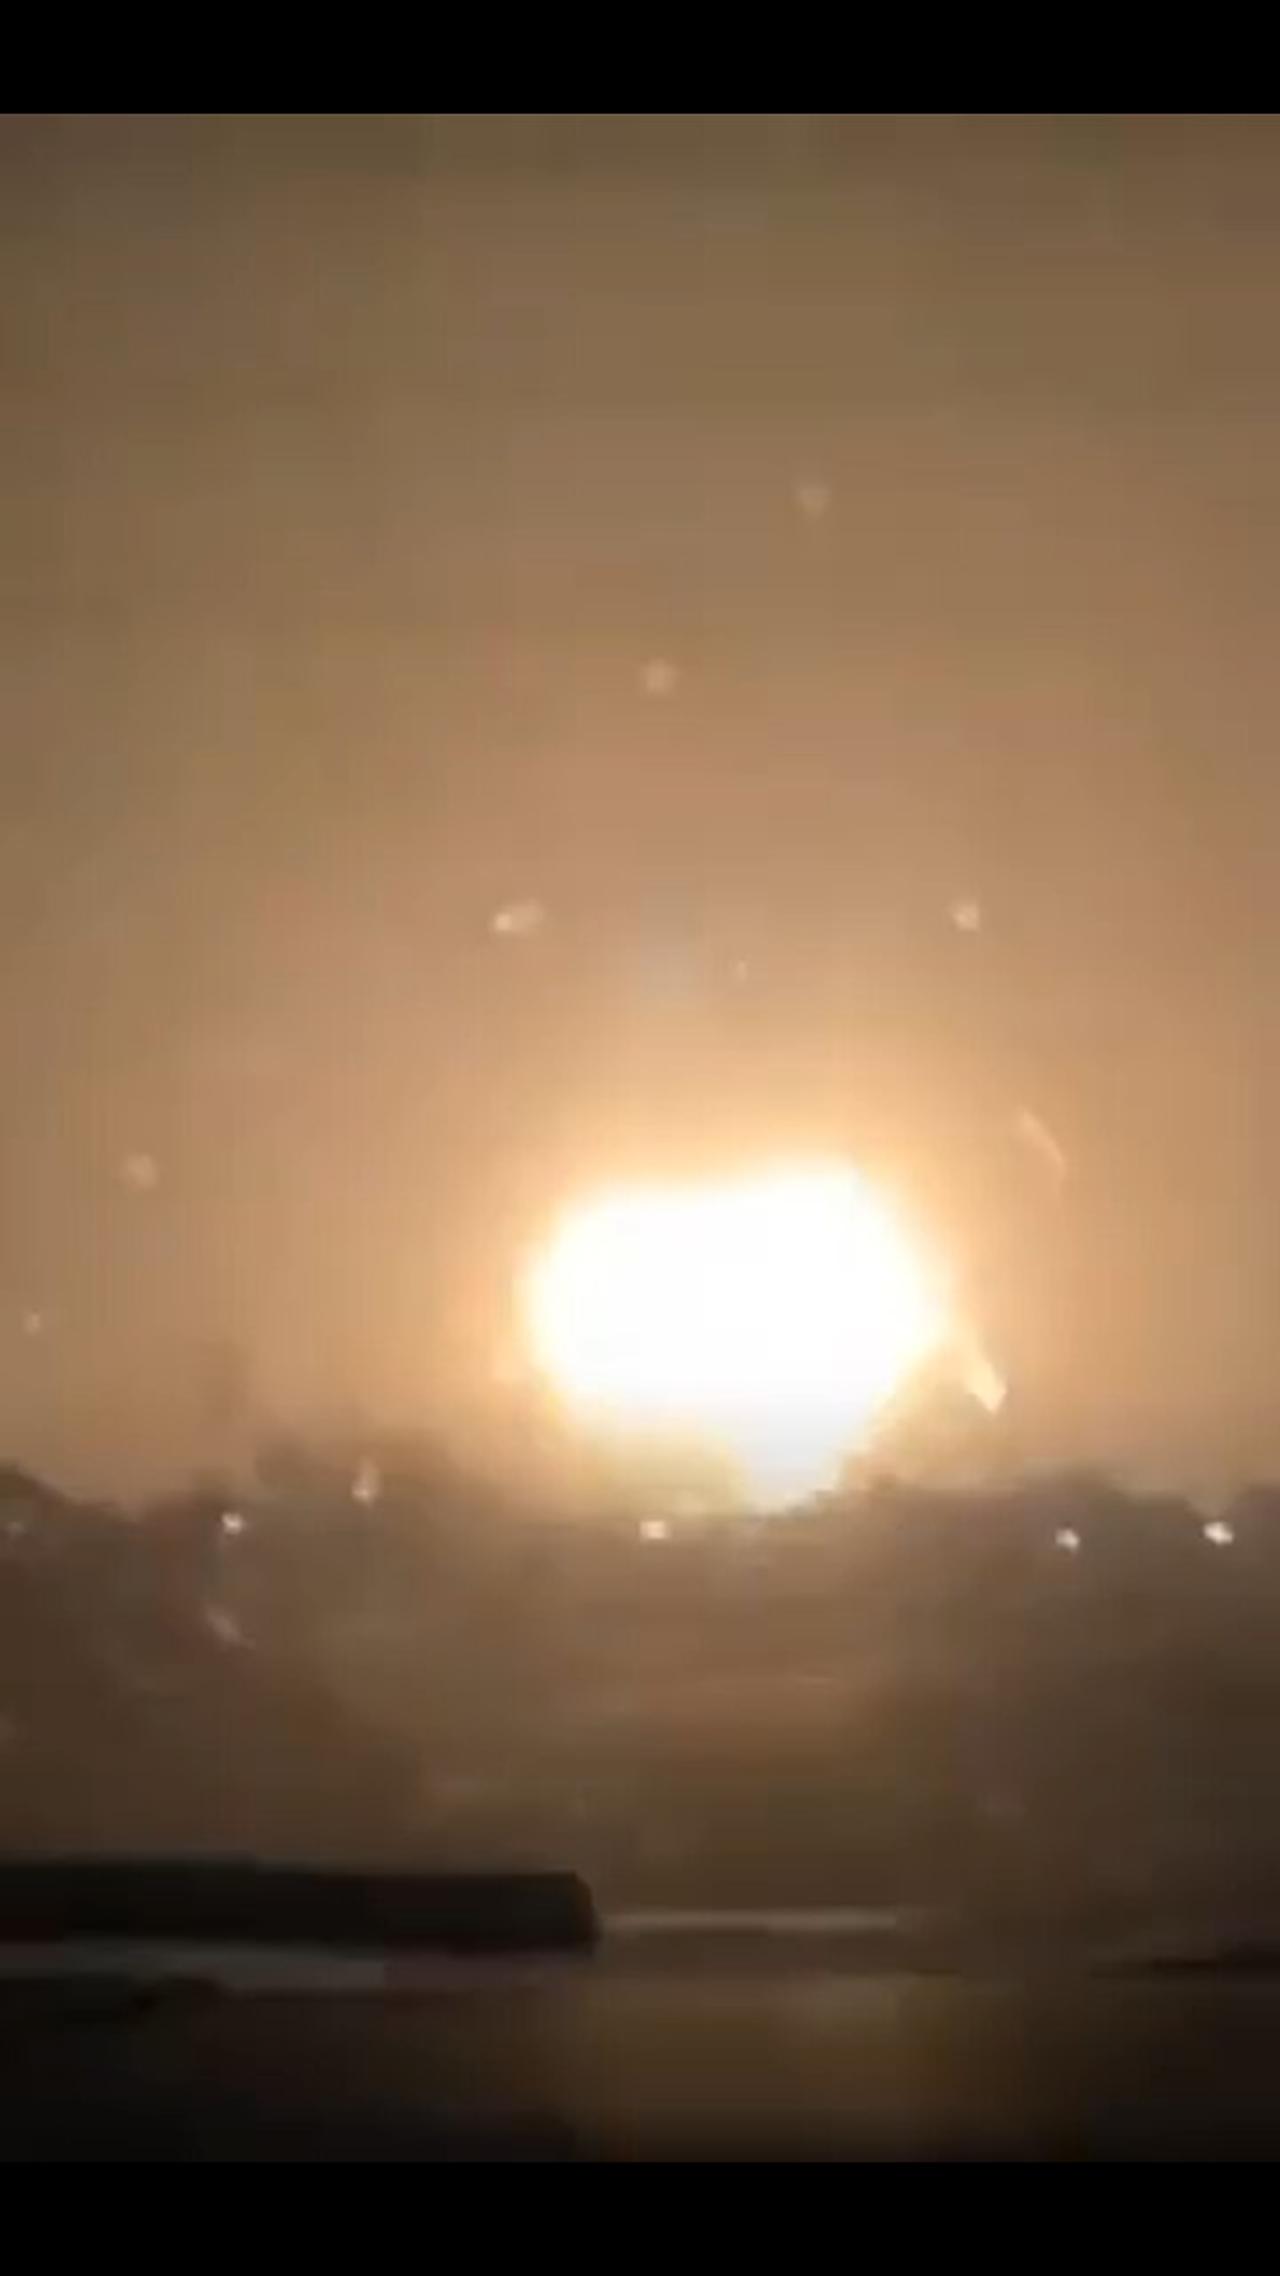 More footage of Dow Chemical plant explosions today in Louisiana, USA